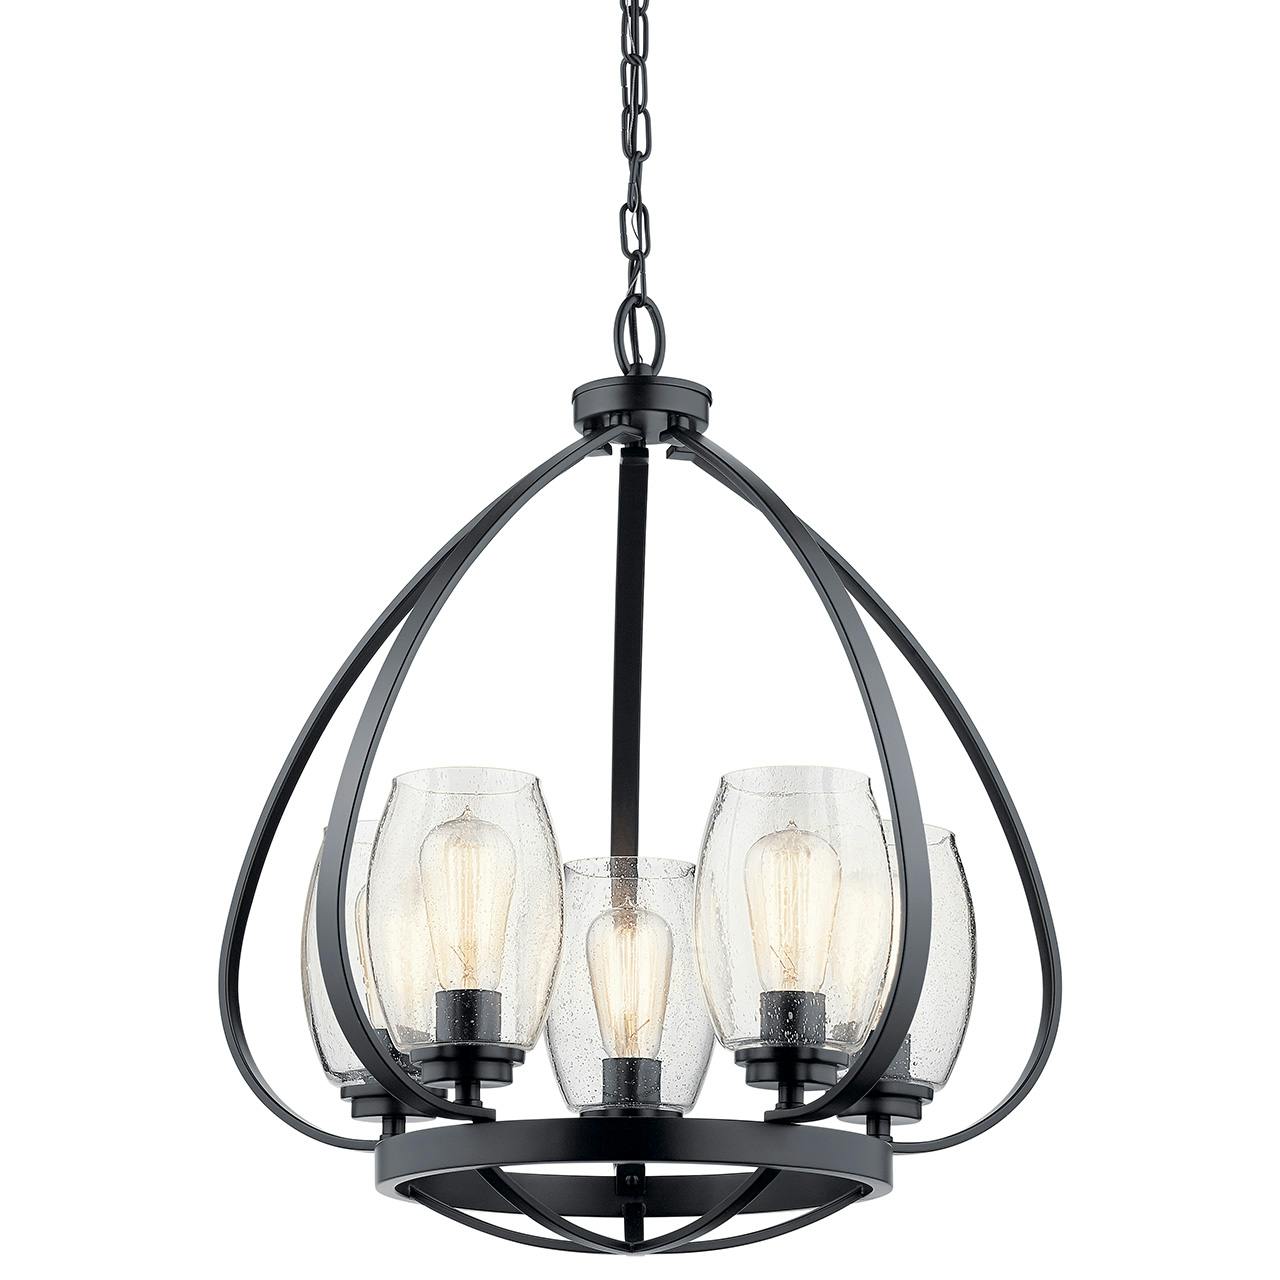 Tuscany 24" 5 Light Chandelier in Black without the canopy on a white background